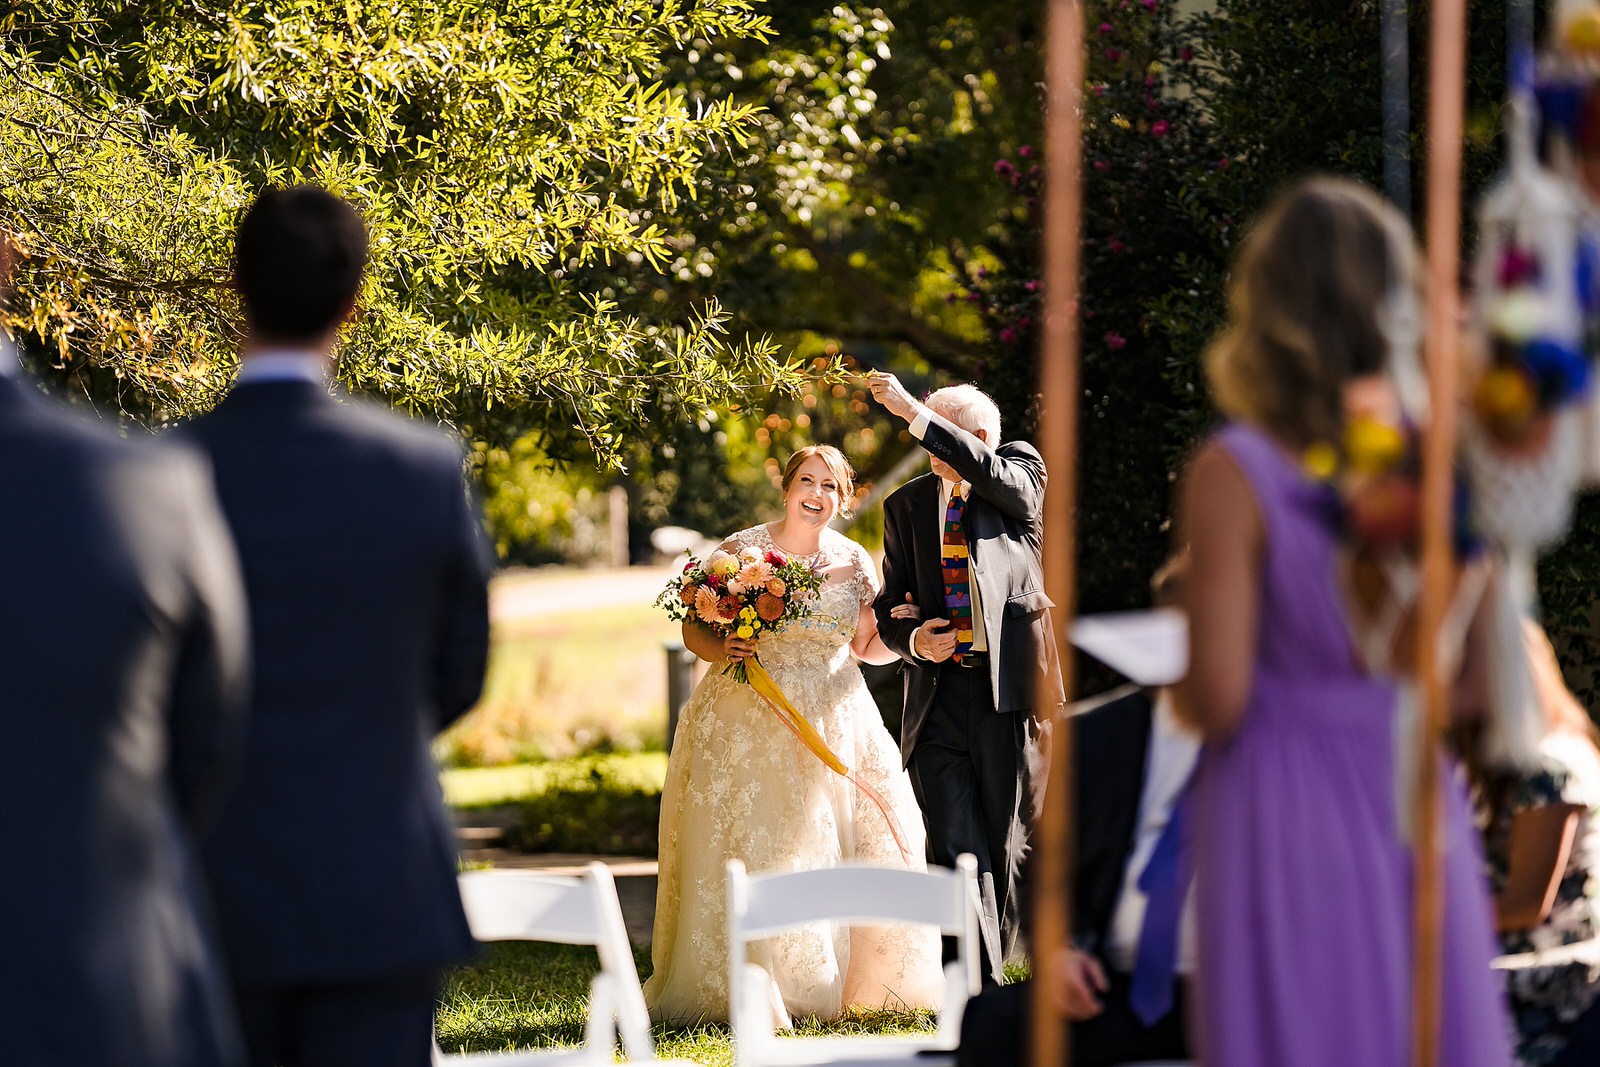 Father of the bride moves a branch out of the way as he walks his daughter down the aisle